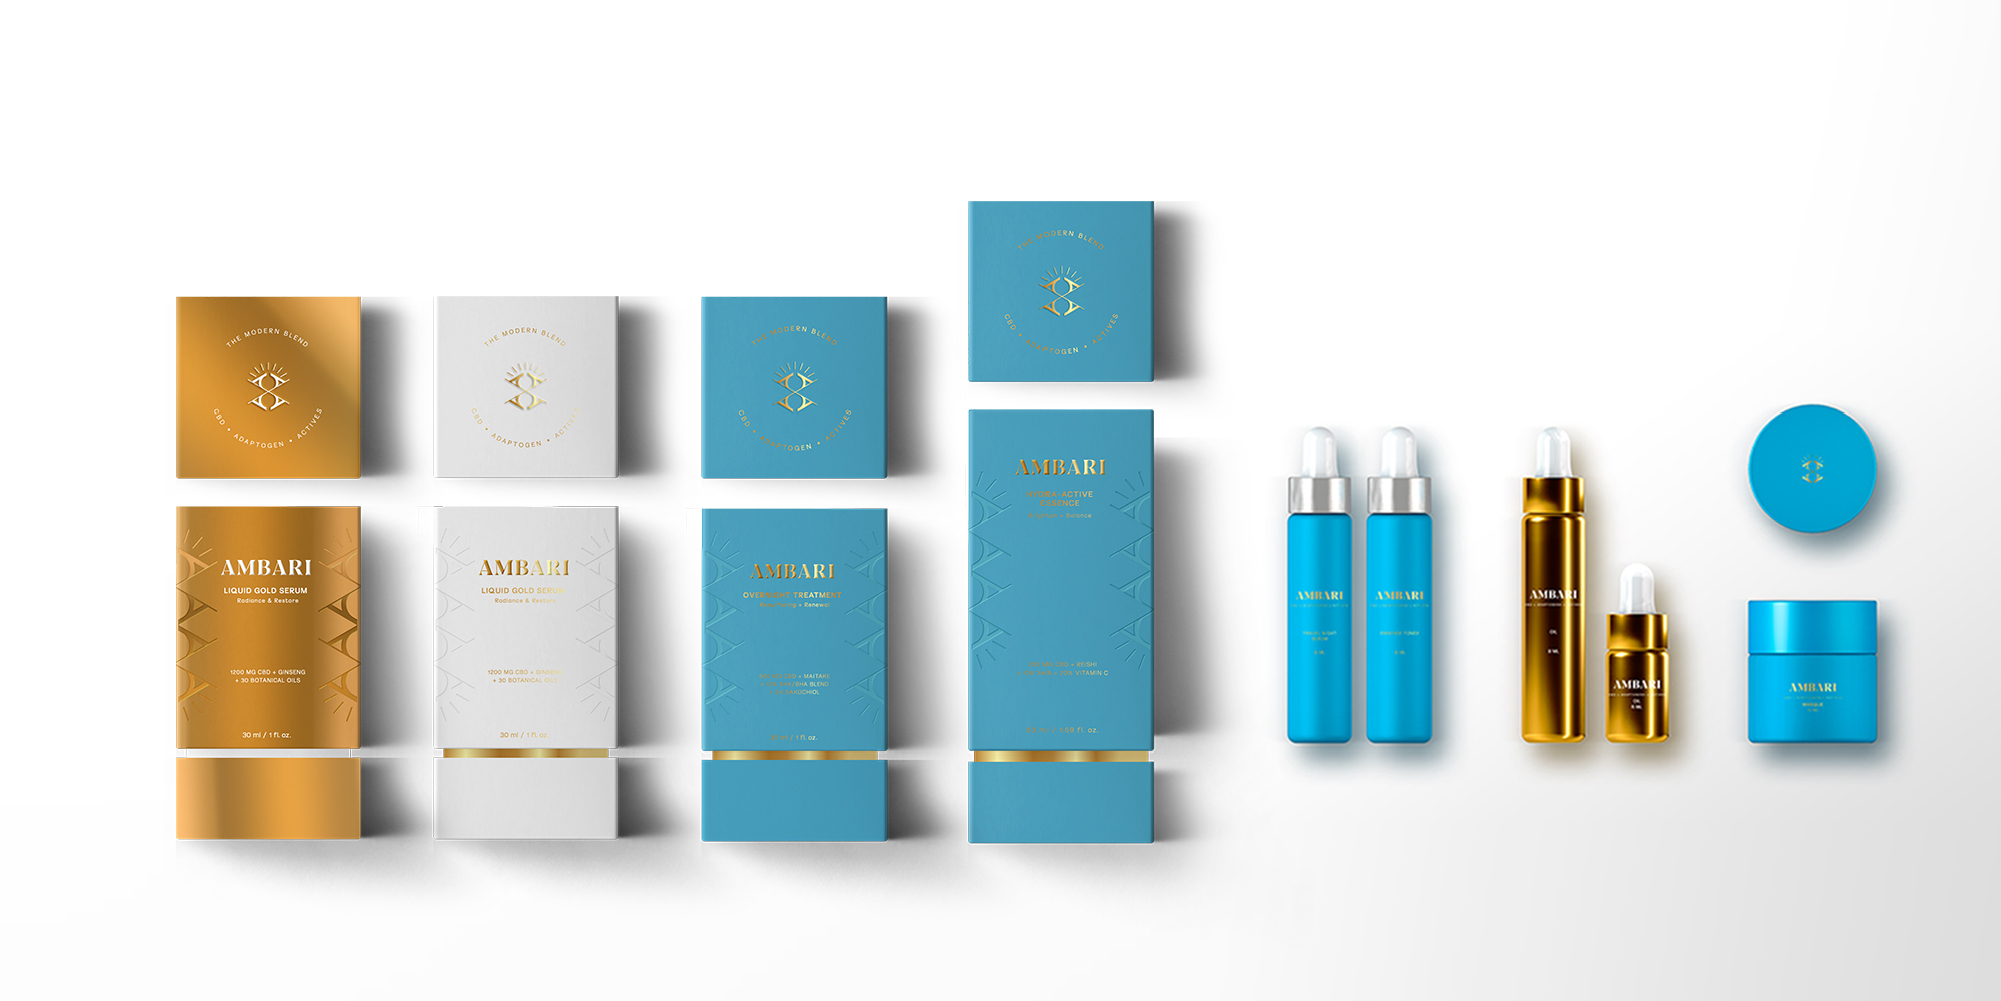 An image showing beauty packaging Venga created